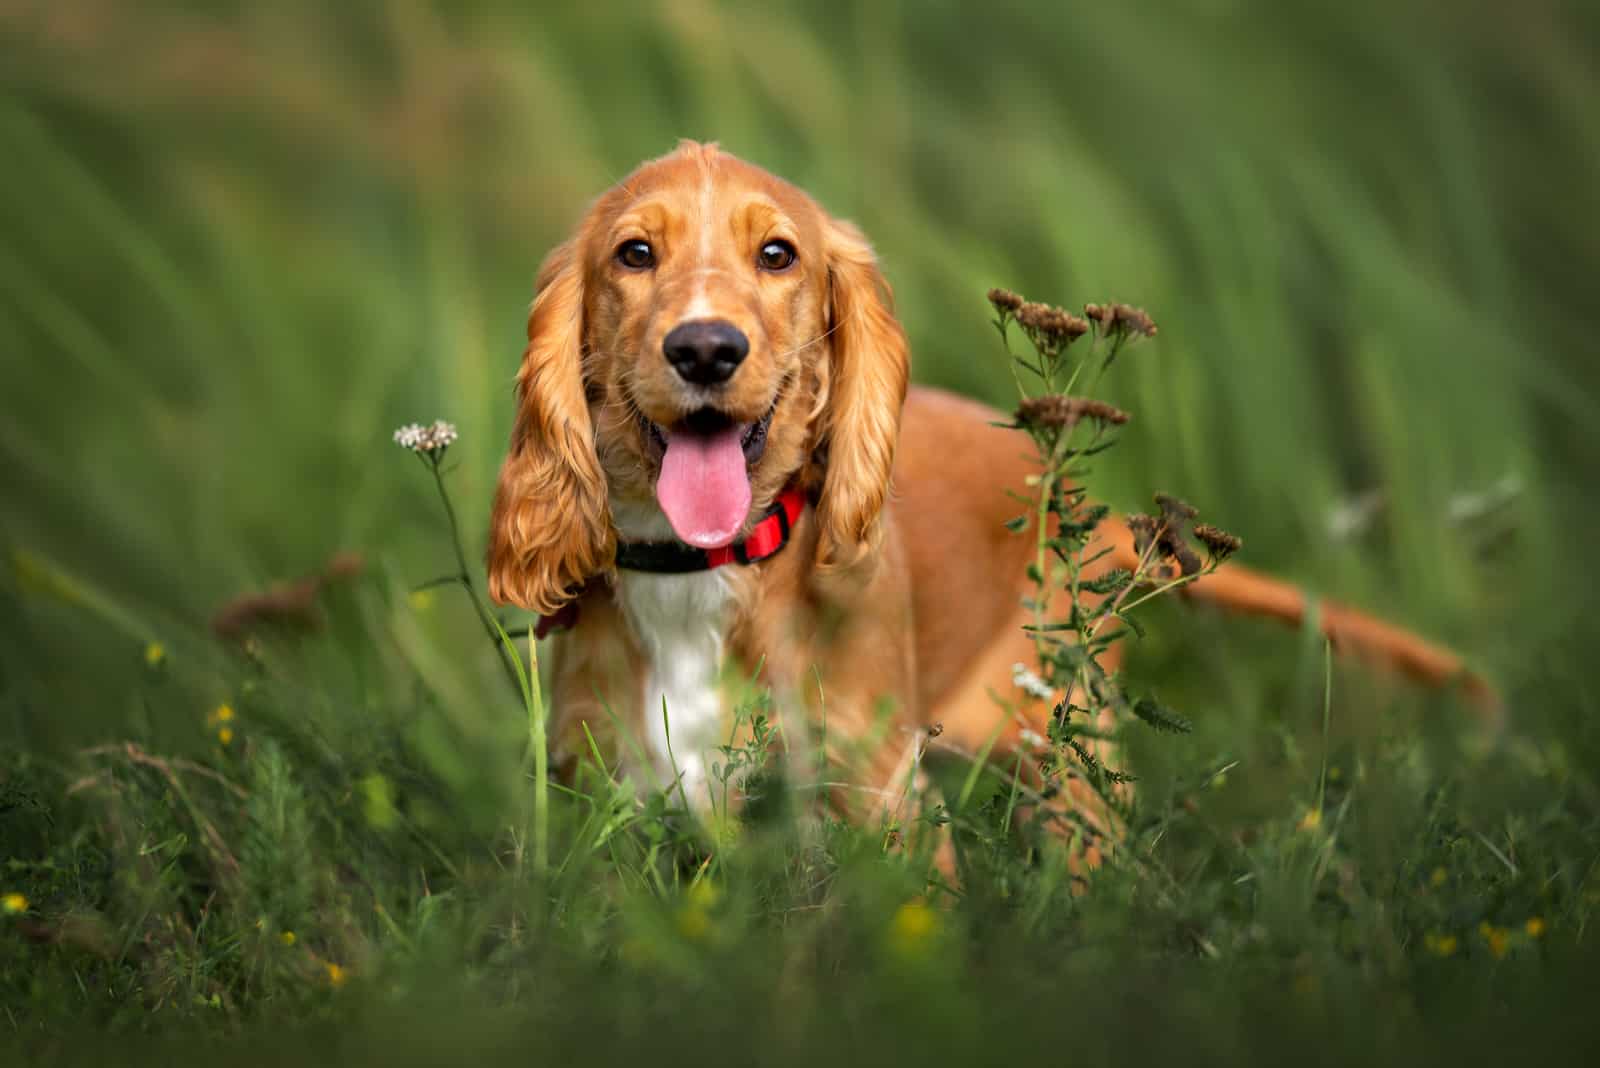 25 American Dog Breeds You Didn’t Know About